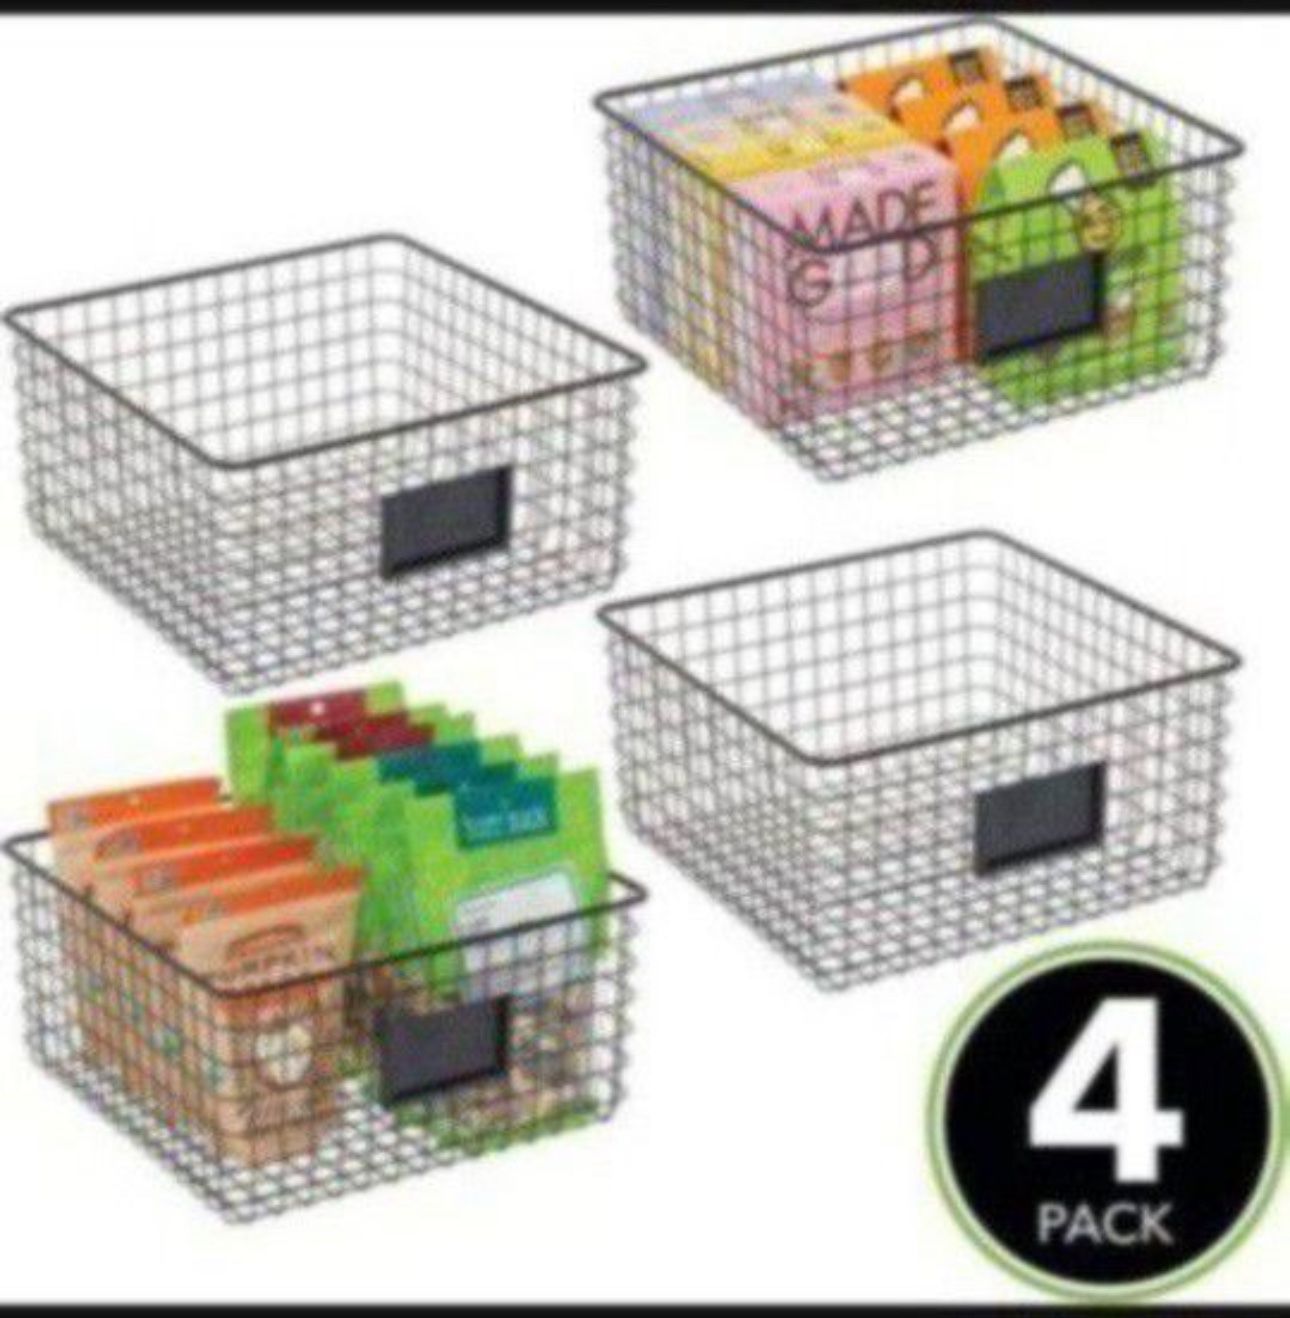 mDesign Square Steel Storage Organizer Bin Baskets with Label Slot for Kitchen Pantry, Cabinet, Cupboard, Organizing Holder for Foo